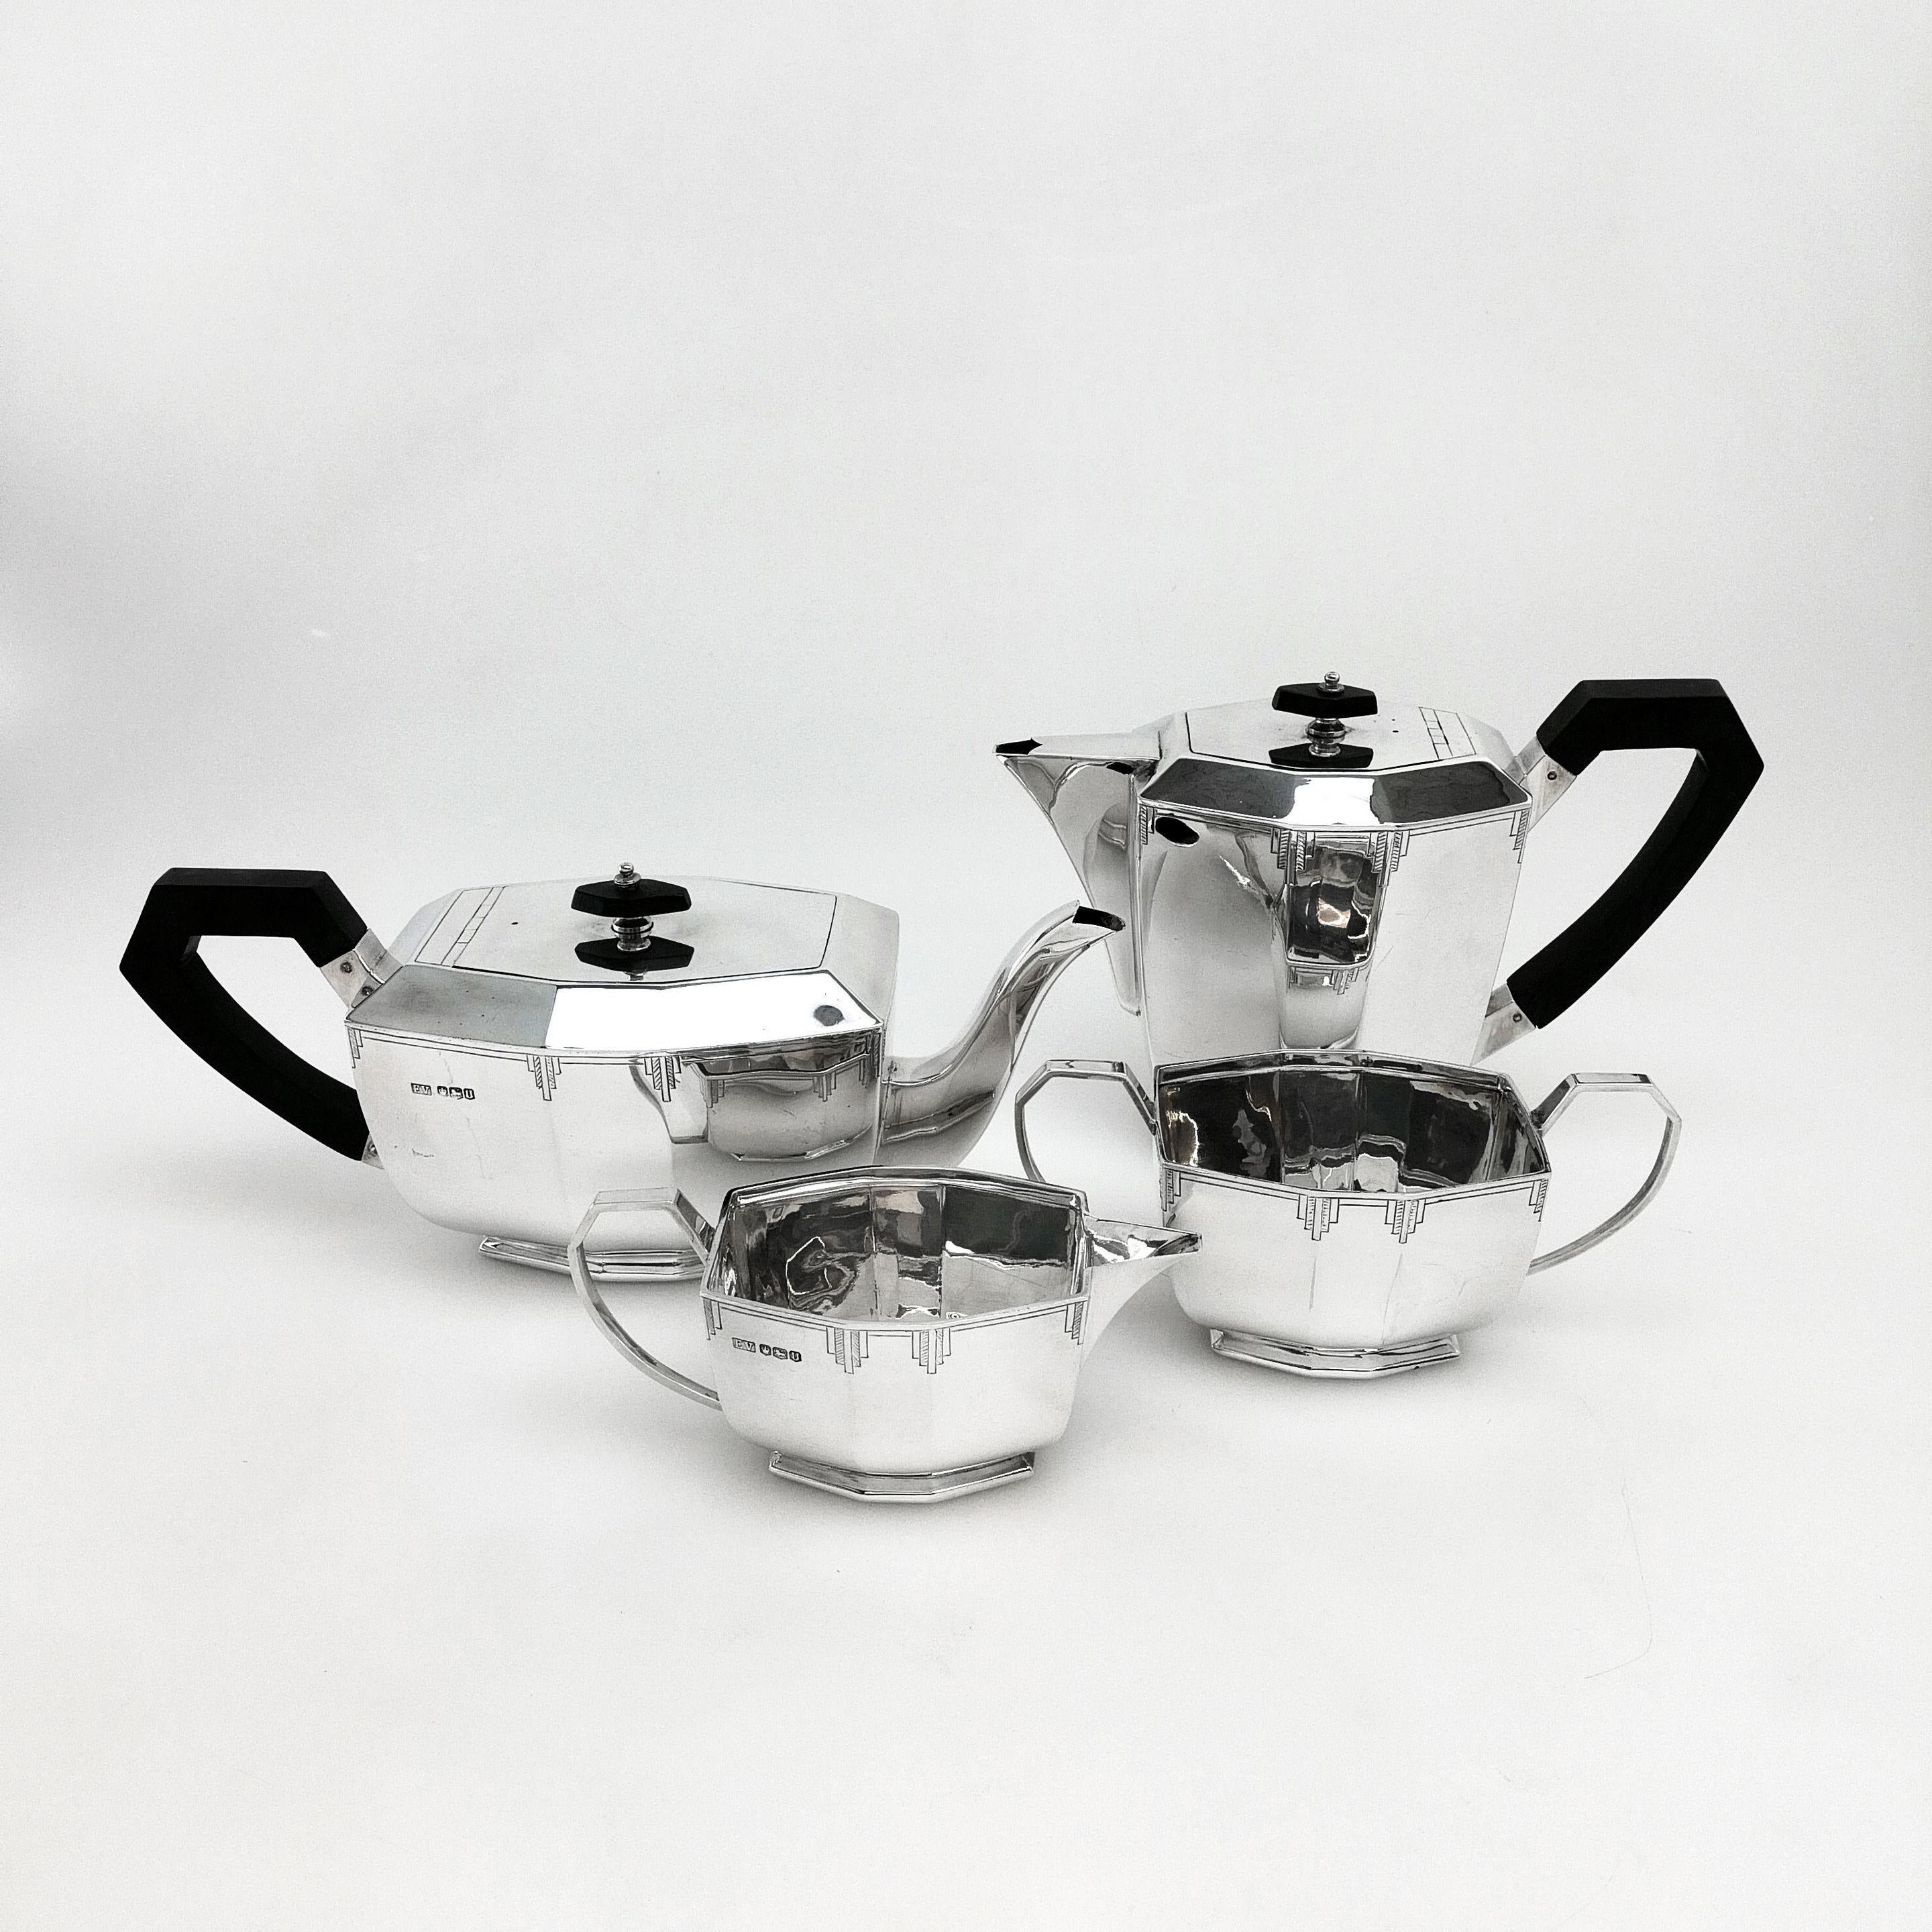 20th Century Art Deco Sterling Silver 4-Piece Tea and Coffee Set on Tray, 1961-1963